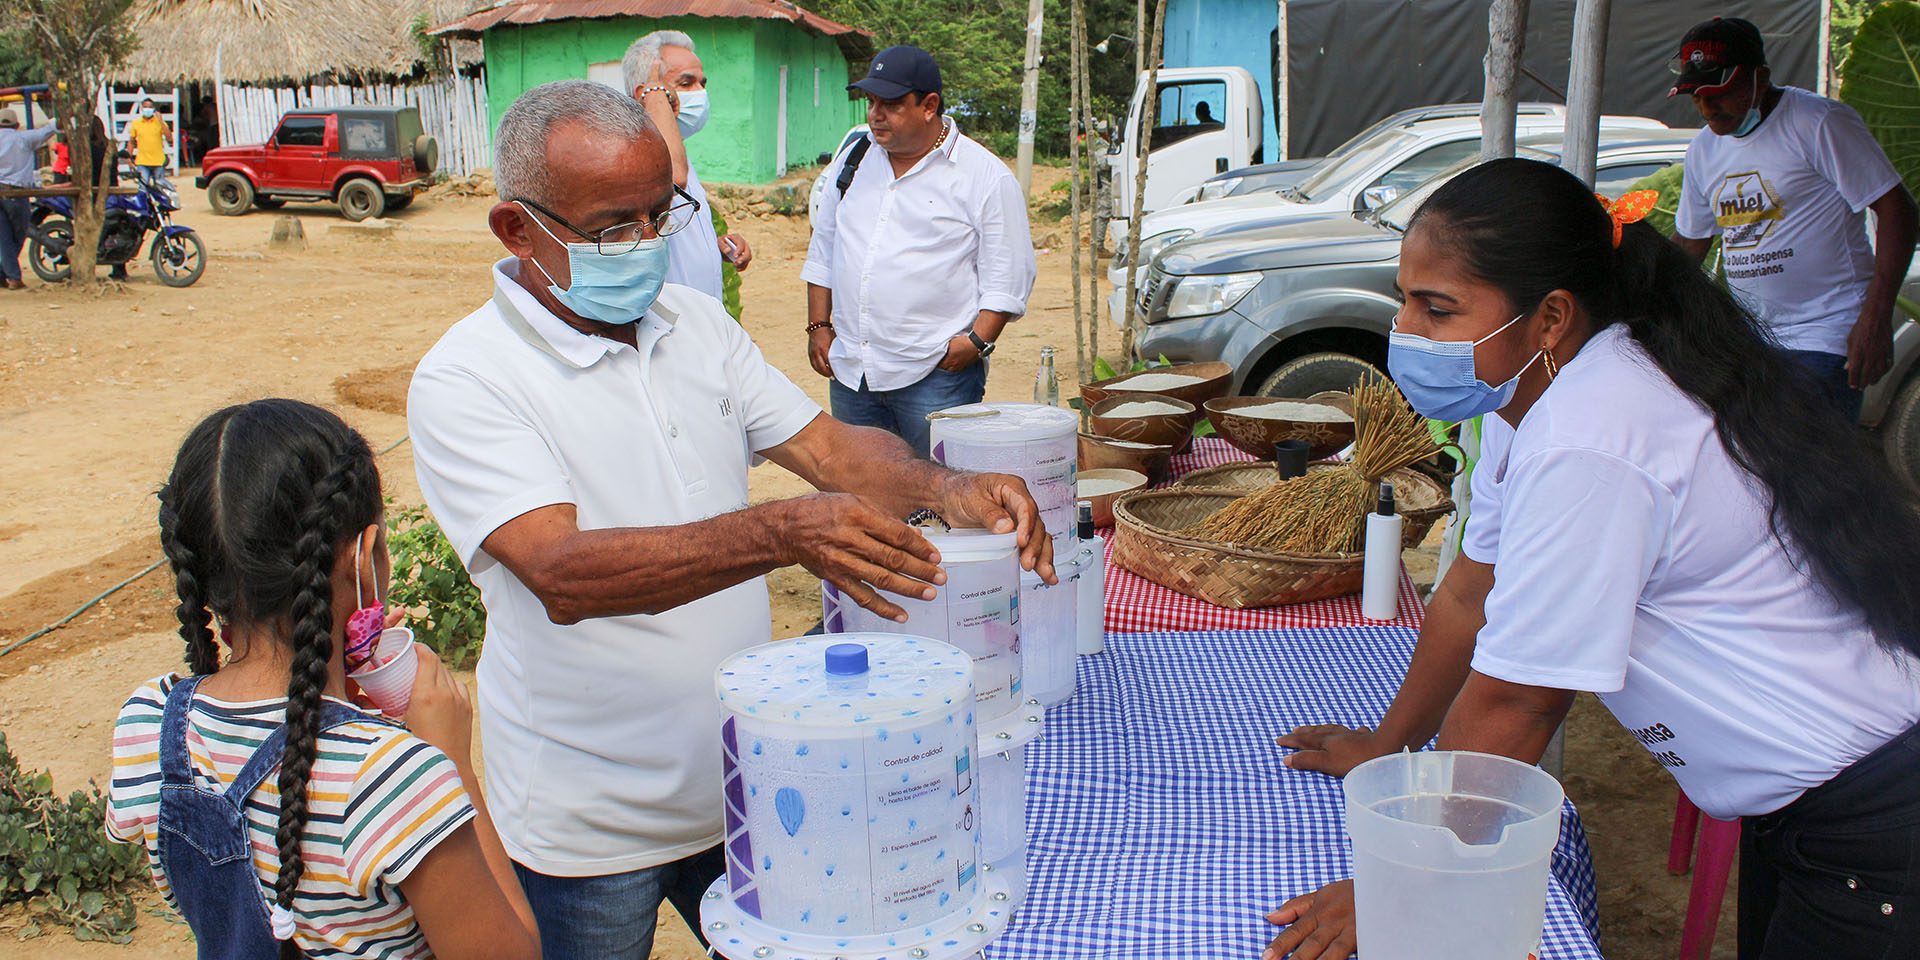 Two pilot projects have already been implemented in Colombia and Ecuador: a water contractor explains to interested people how the water filter works.